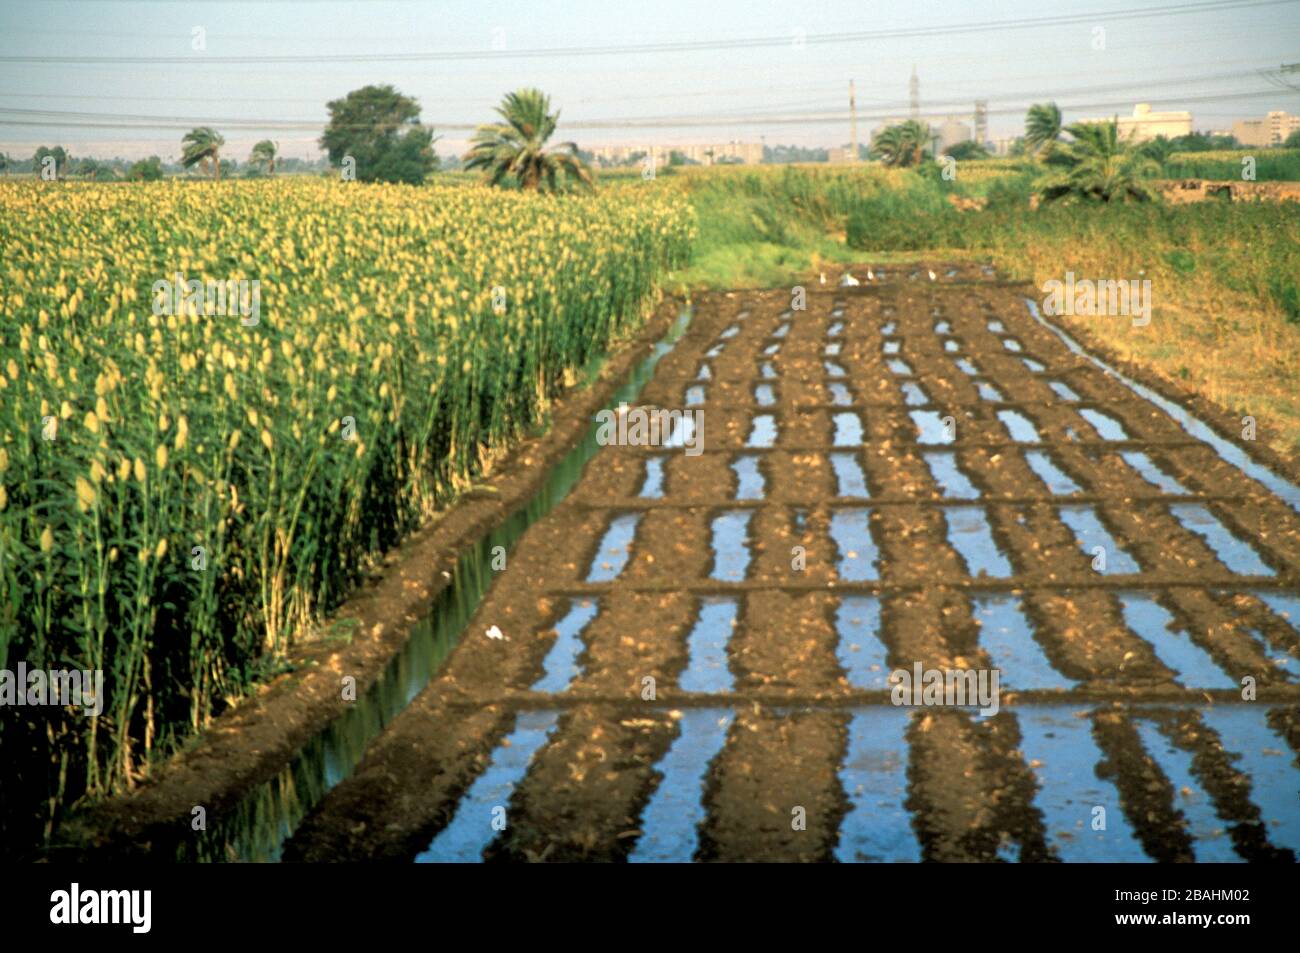 Irrigation field from the Nile river in Upper Egypt Stock Photo